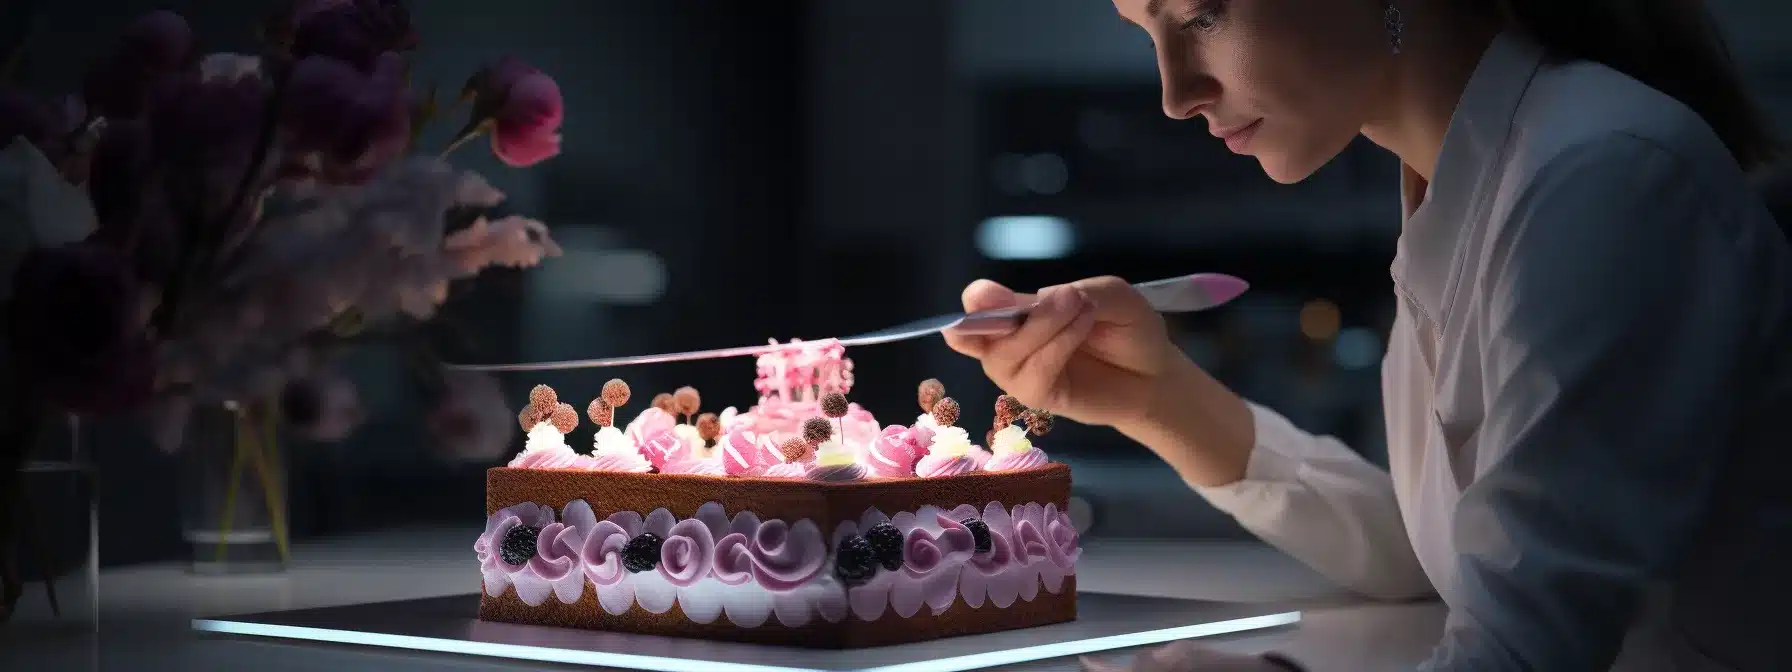 A Brand Manager Carefully Layers A Cake, Starting With A Solid Foundation And Ending With Sparkling Customer Engagement.